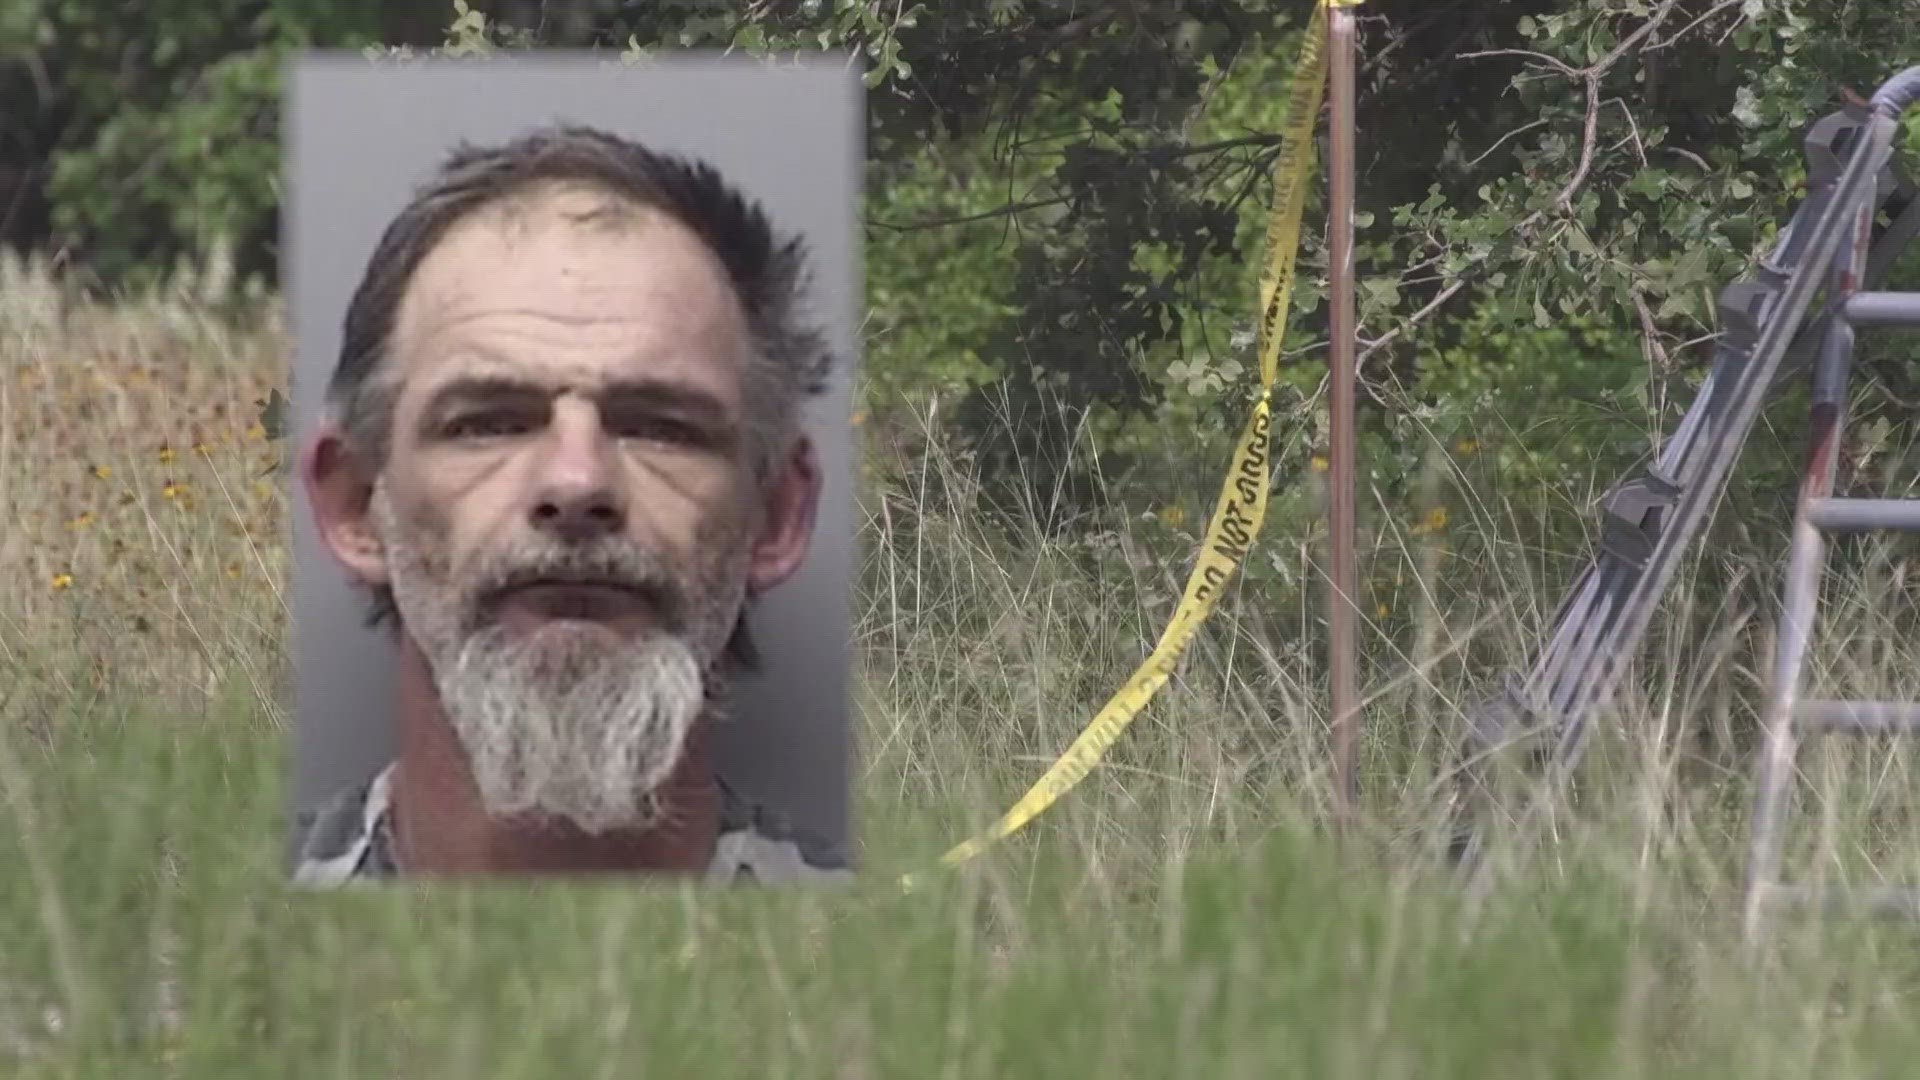 Robert Morairity was charged with murder, capital murder and tampering with a corpse in Wise County, Texas.